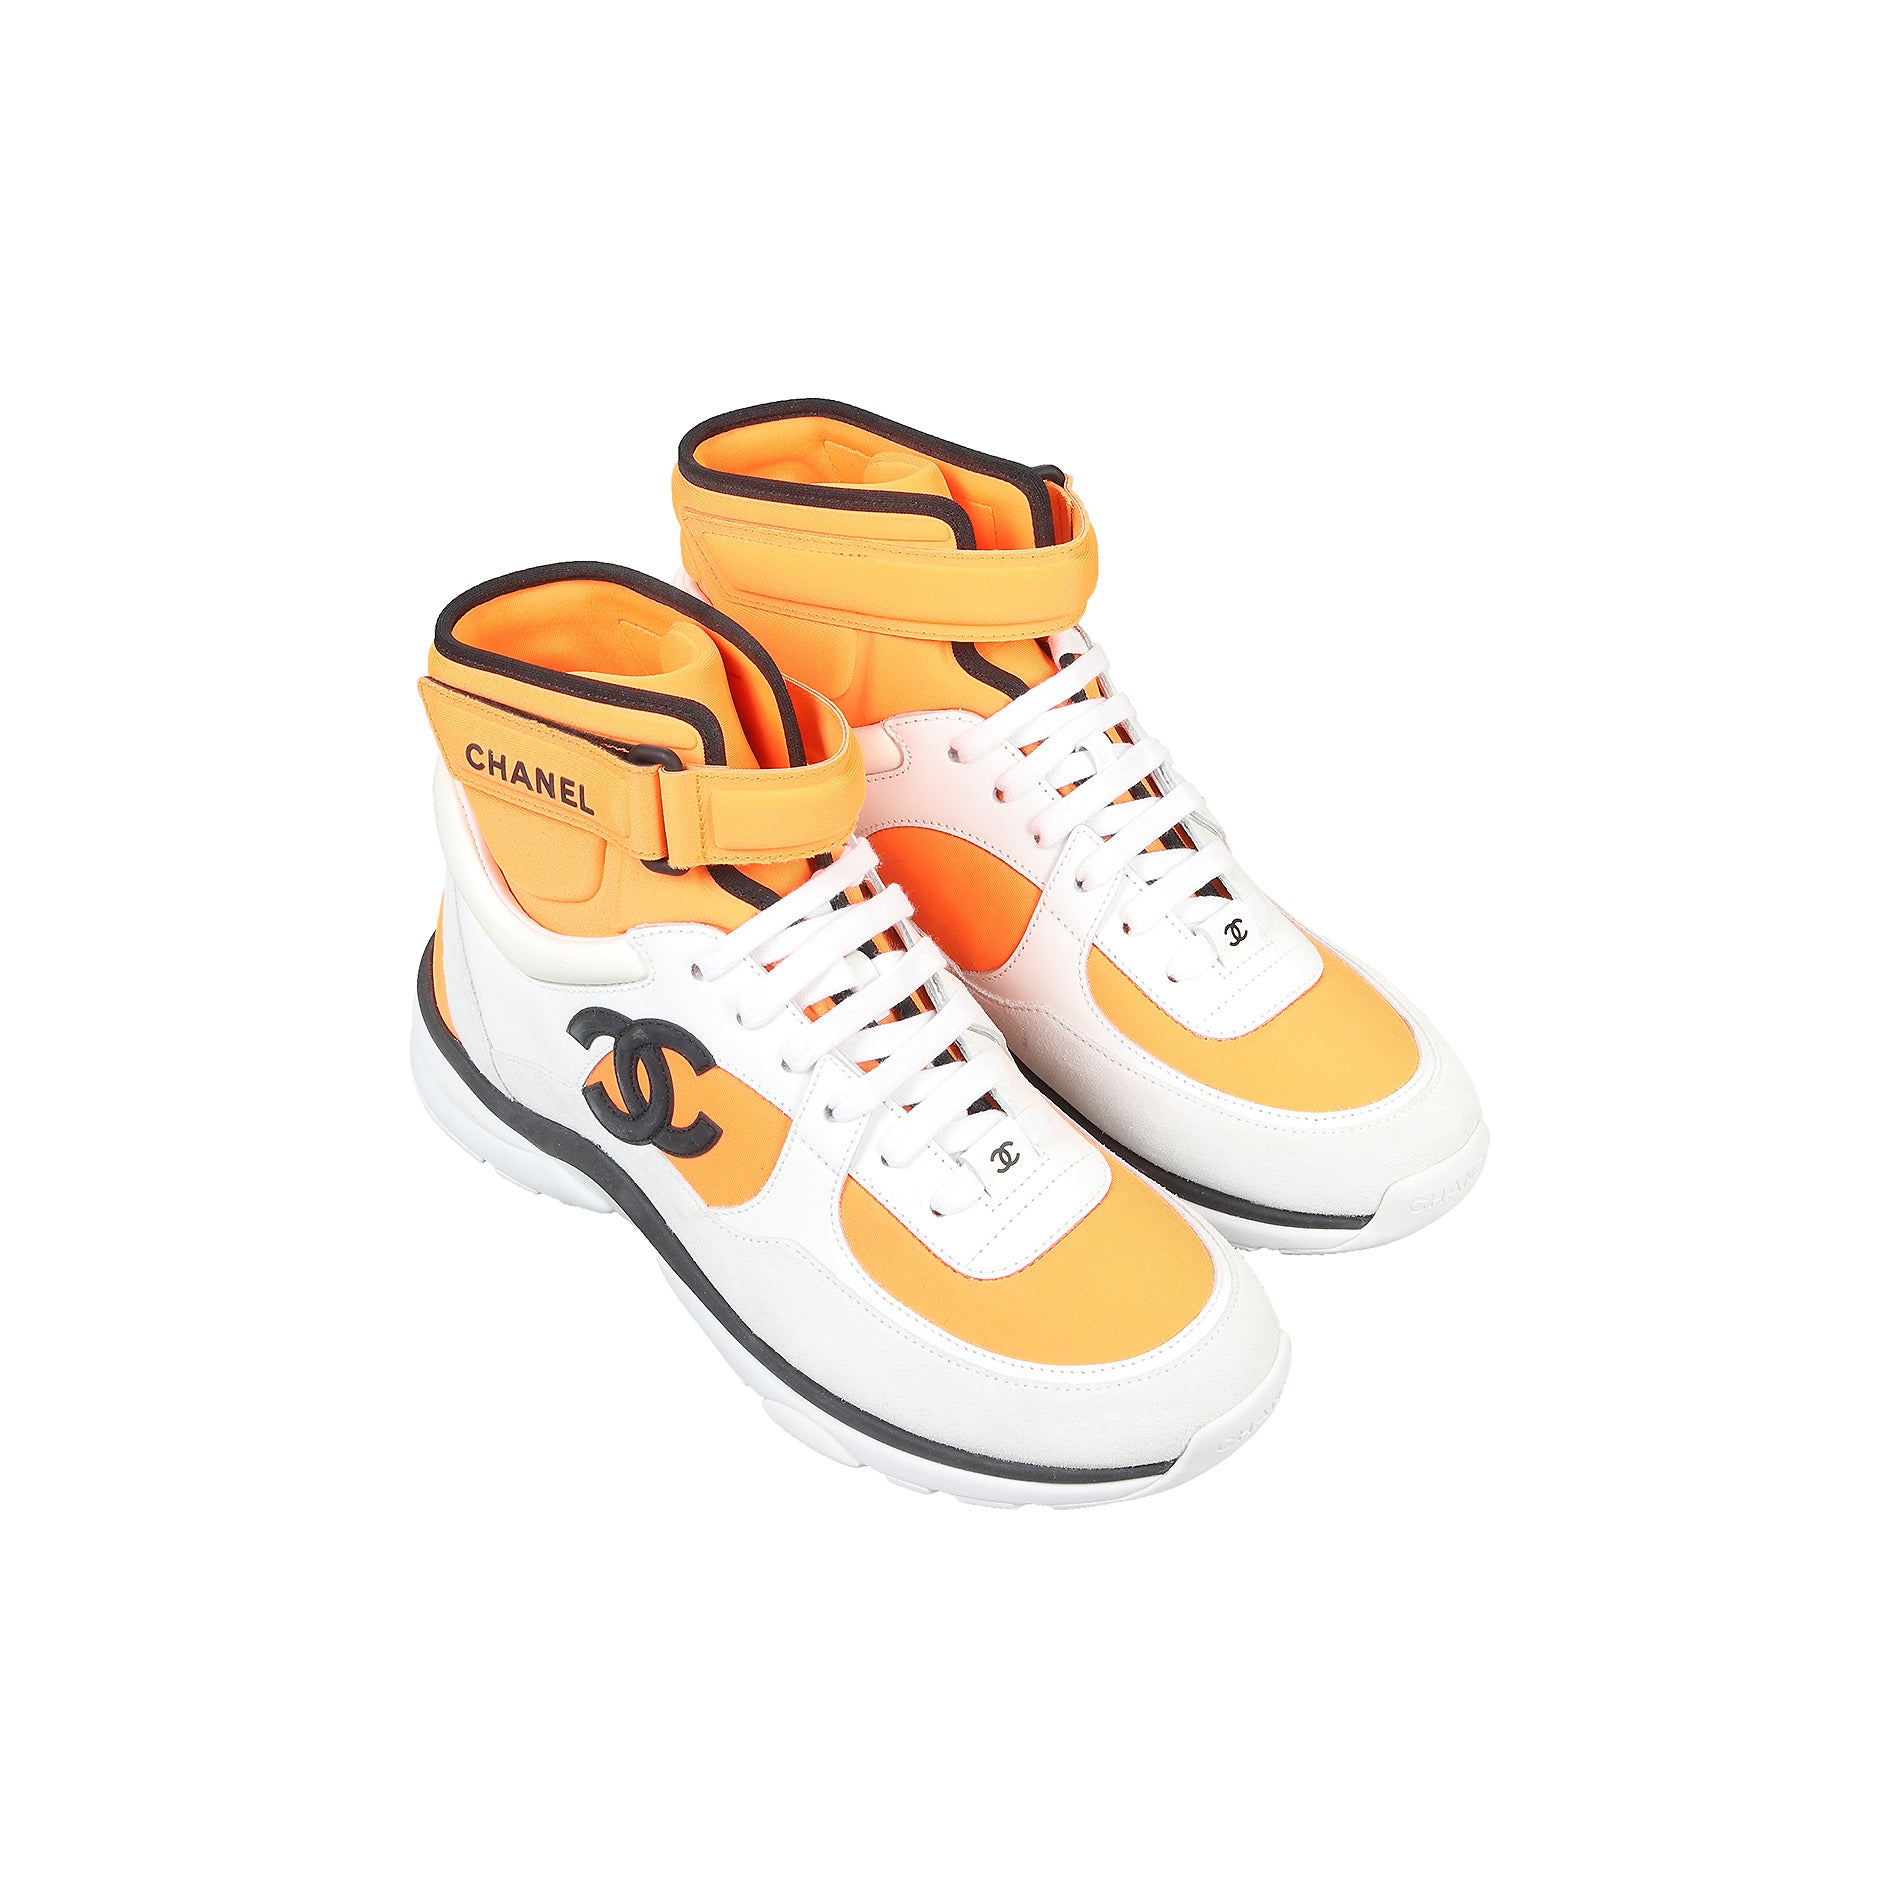 Chanel Sneakers Orange  Size 39  THE PURSE AFFAIR